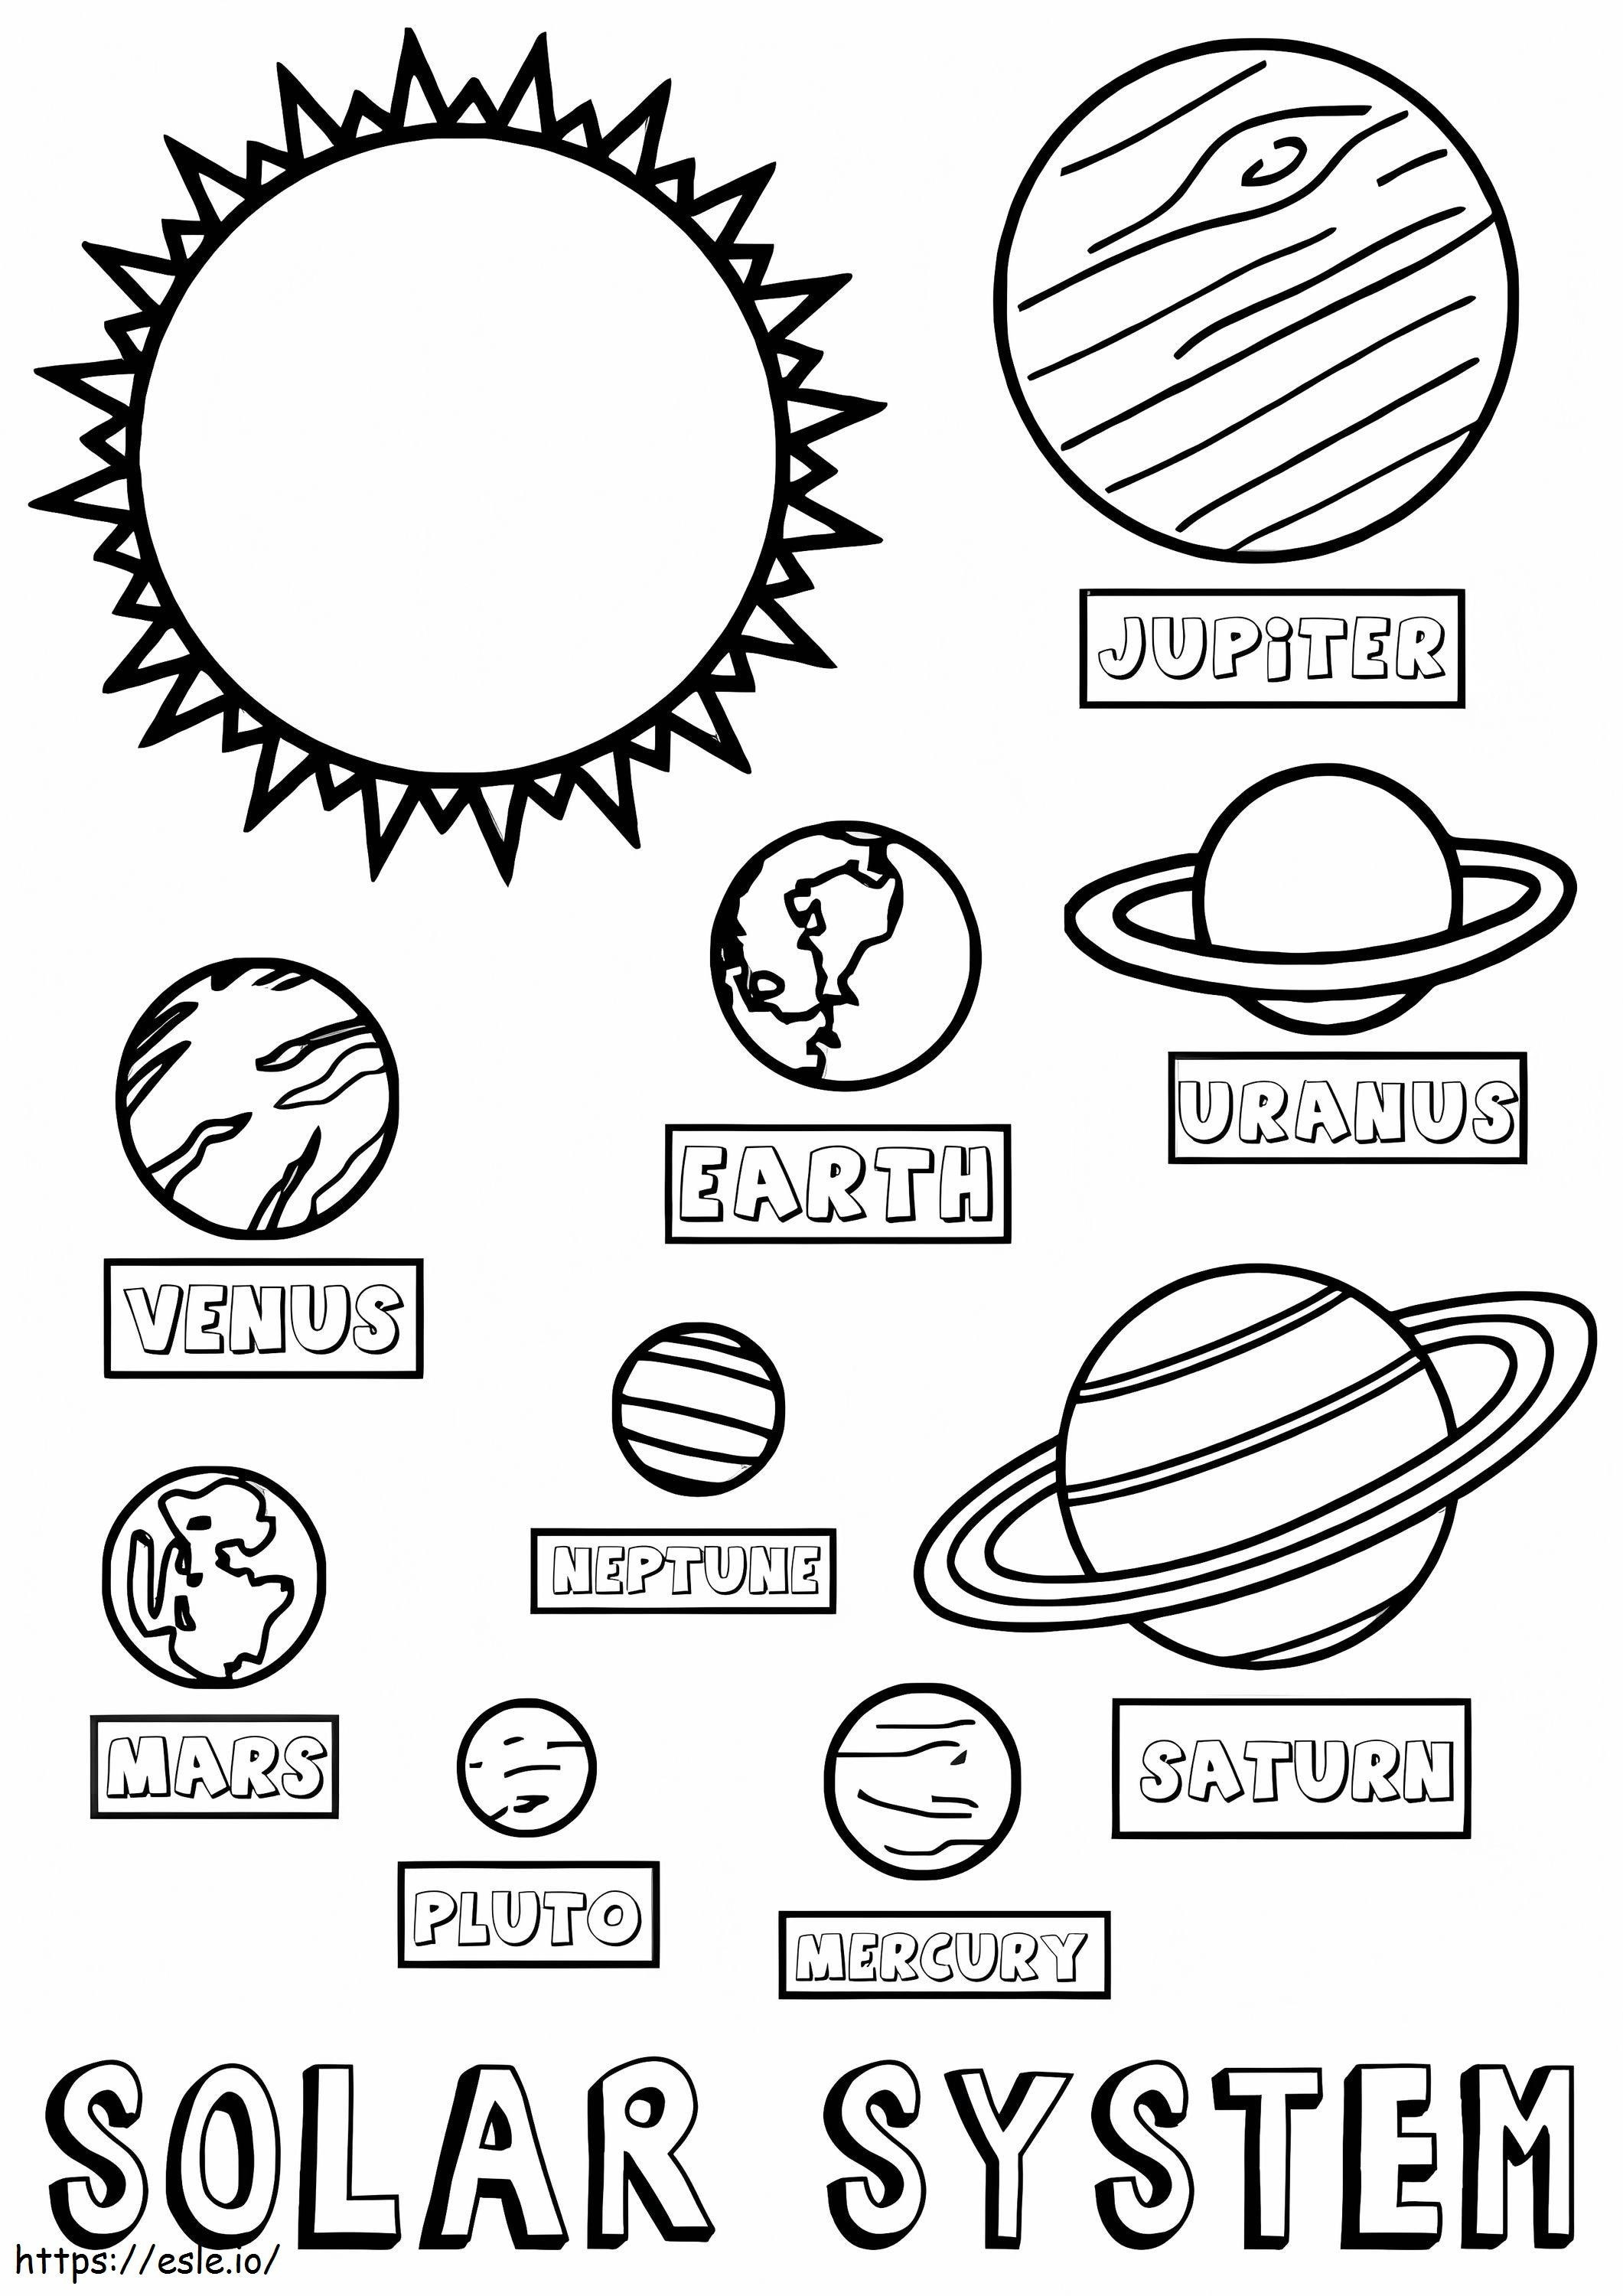 Draw Planets In The Solar System coloring page